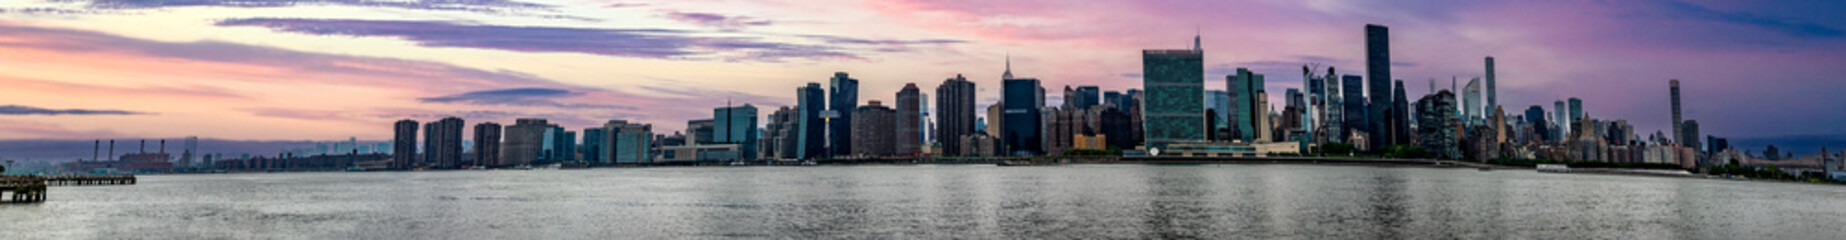 Great panoramic view of the Big Apple skyline seen at sunset from Long Island which is an island...